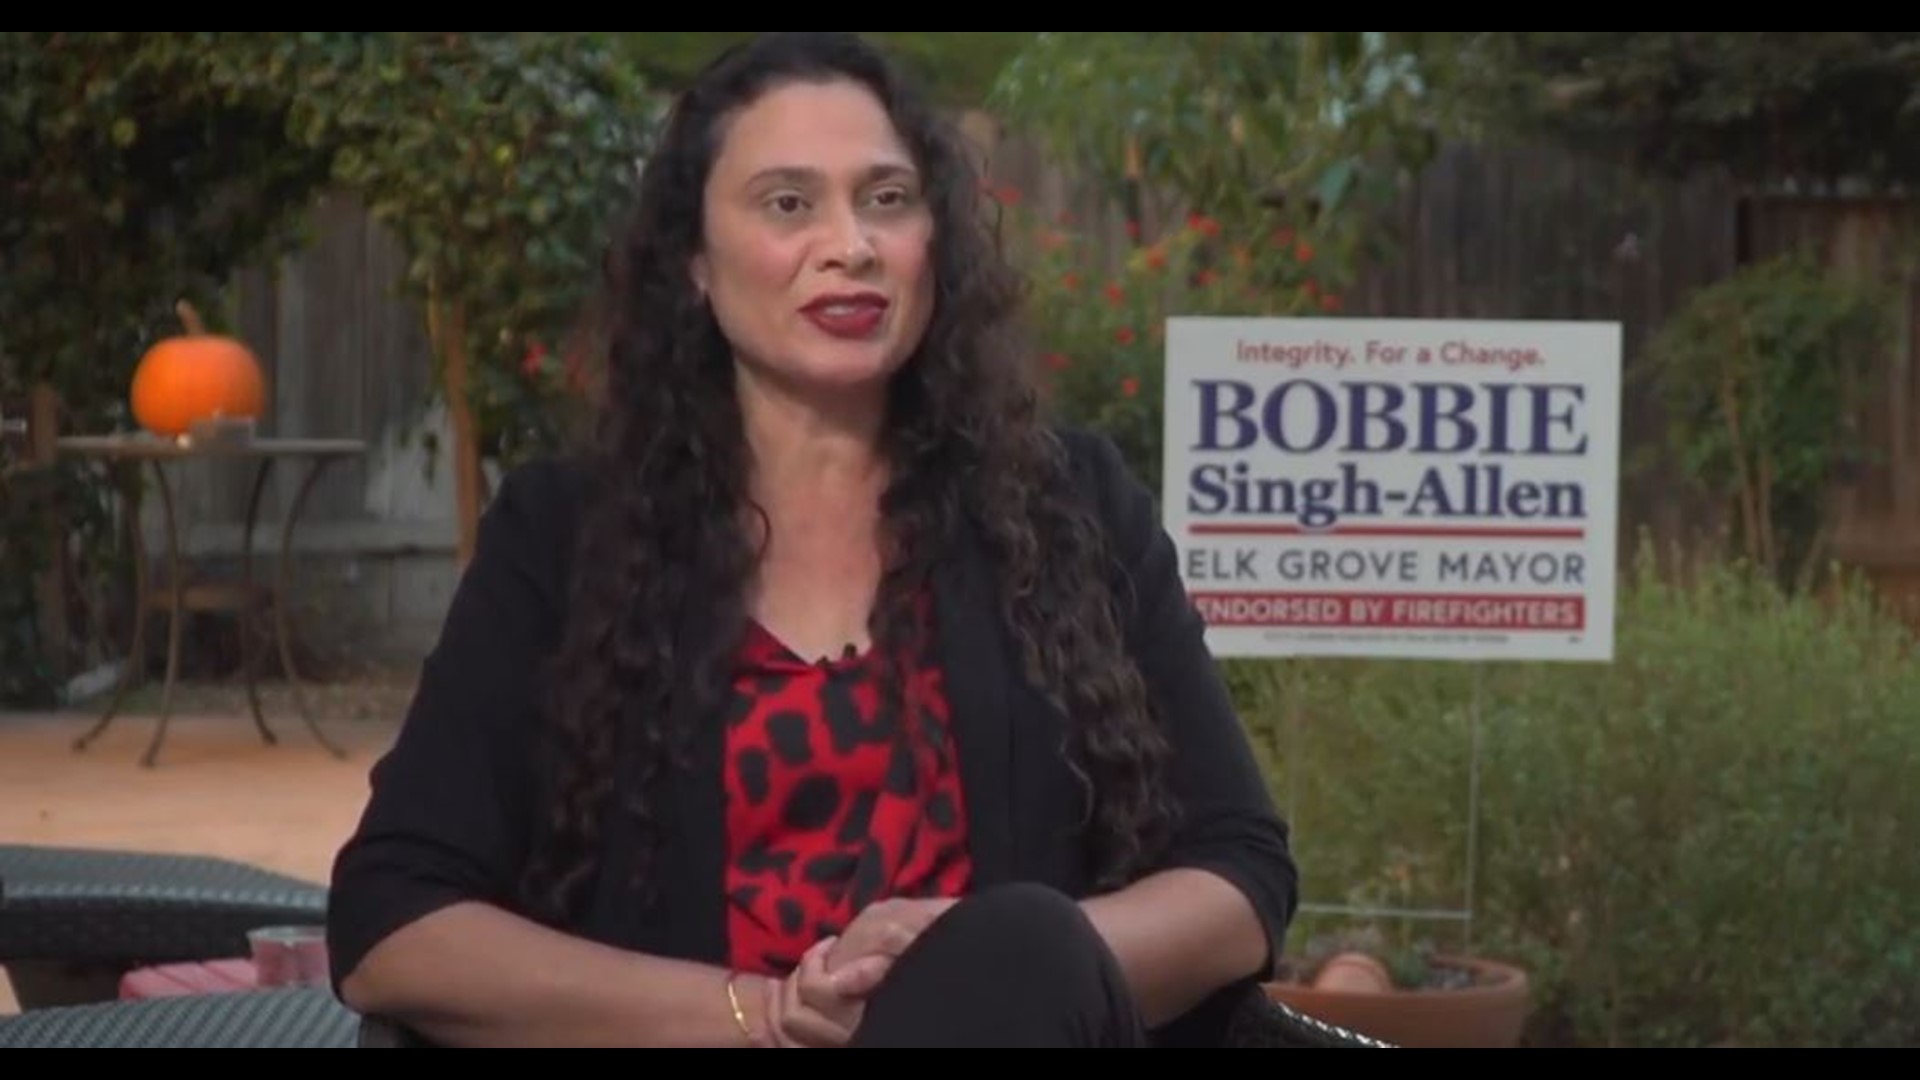 Giacomo Luca sat down with Bobbie Singh-Allen to discuss her decision to run for mayor of Elk Grove.